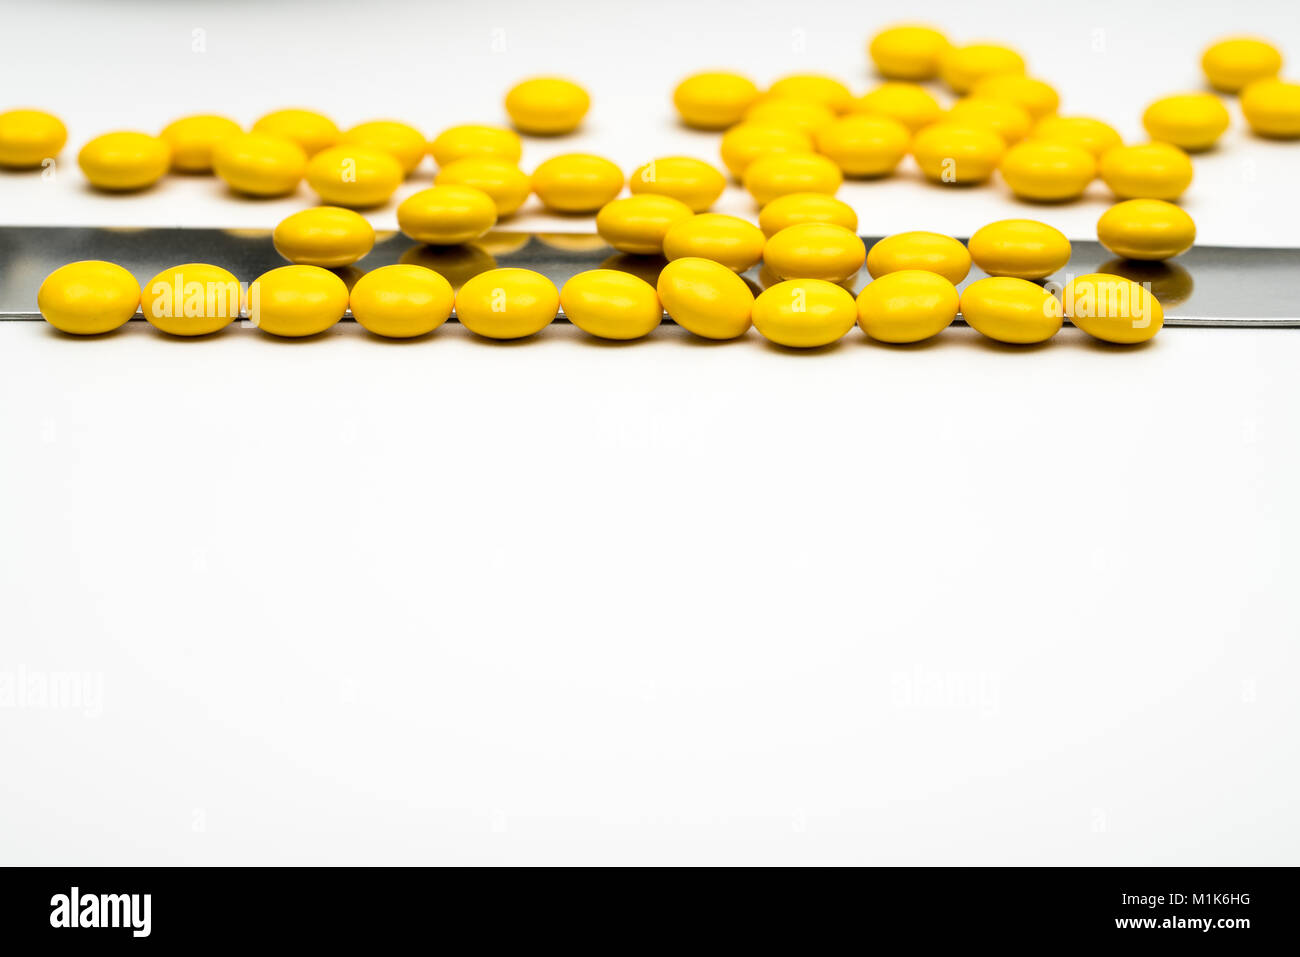 Macro shot detail of yellow round sugar coated tablets pills and stainless steel spatula on white background with copy space Stock Photo